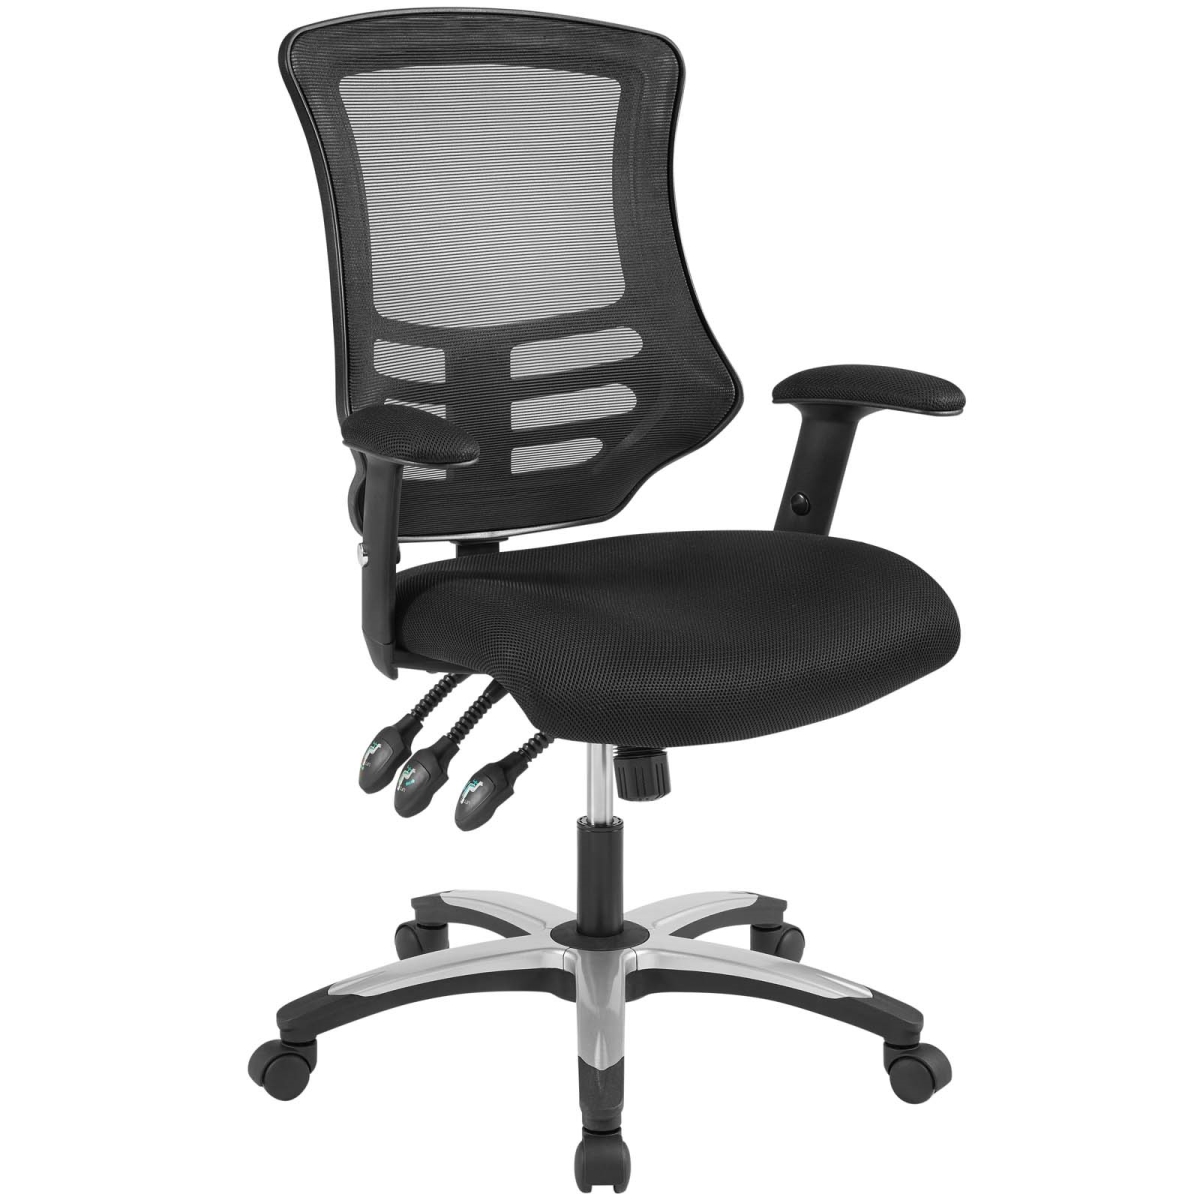 Eei-3042-blk 38.5 - 46 X 26.5 In. Calibrate Mesh Office Chair - Black